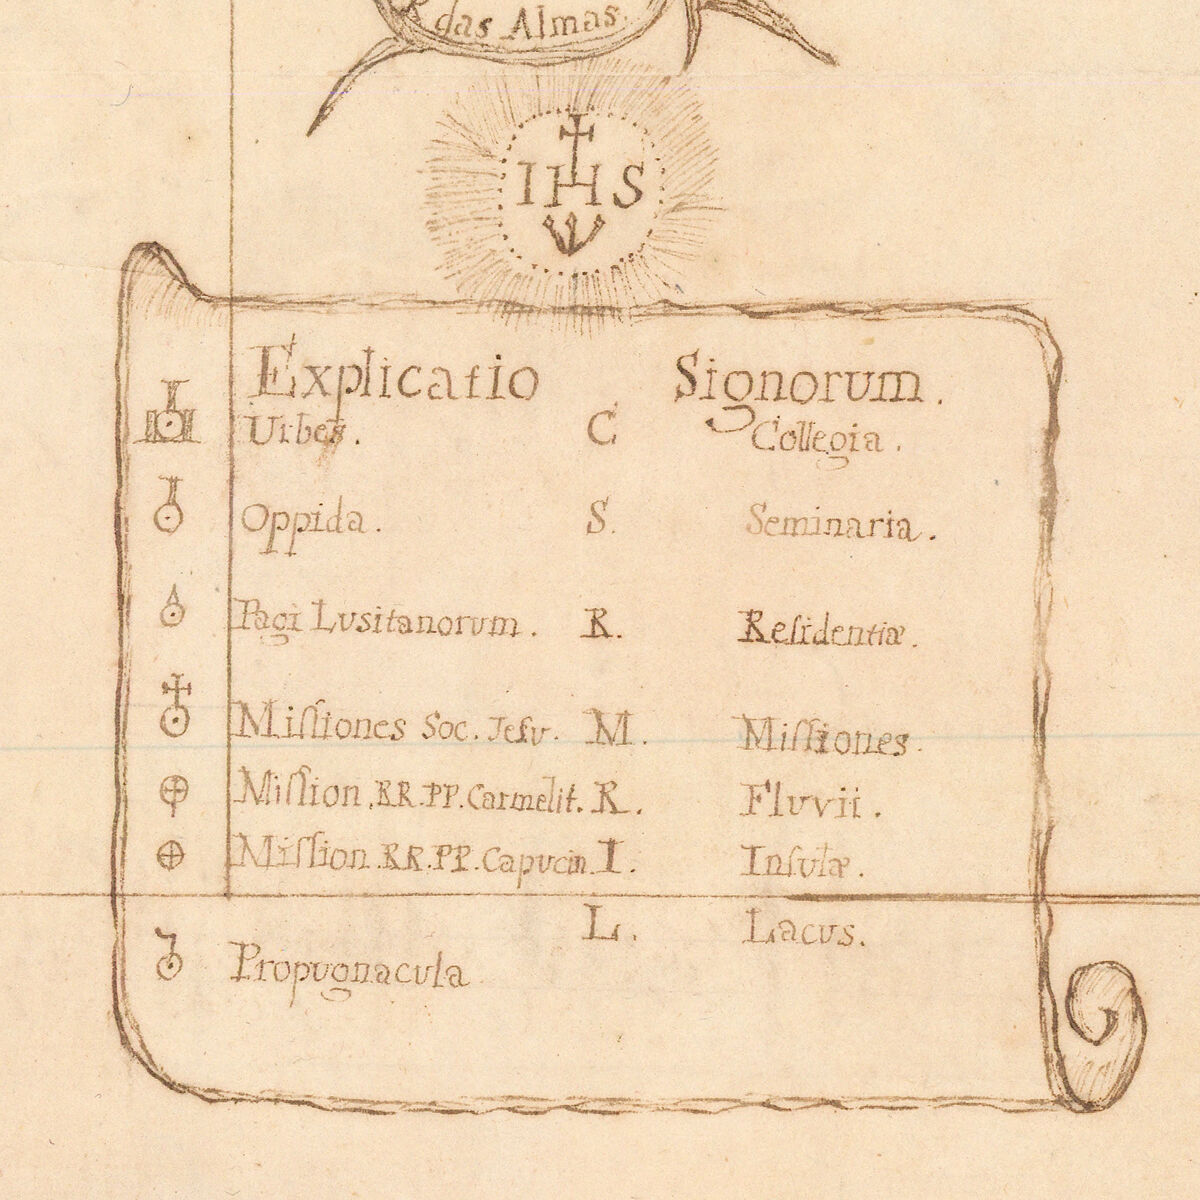 Details of the key in Eckart's 1755 map